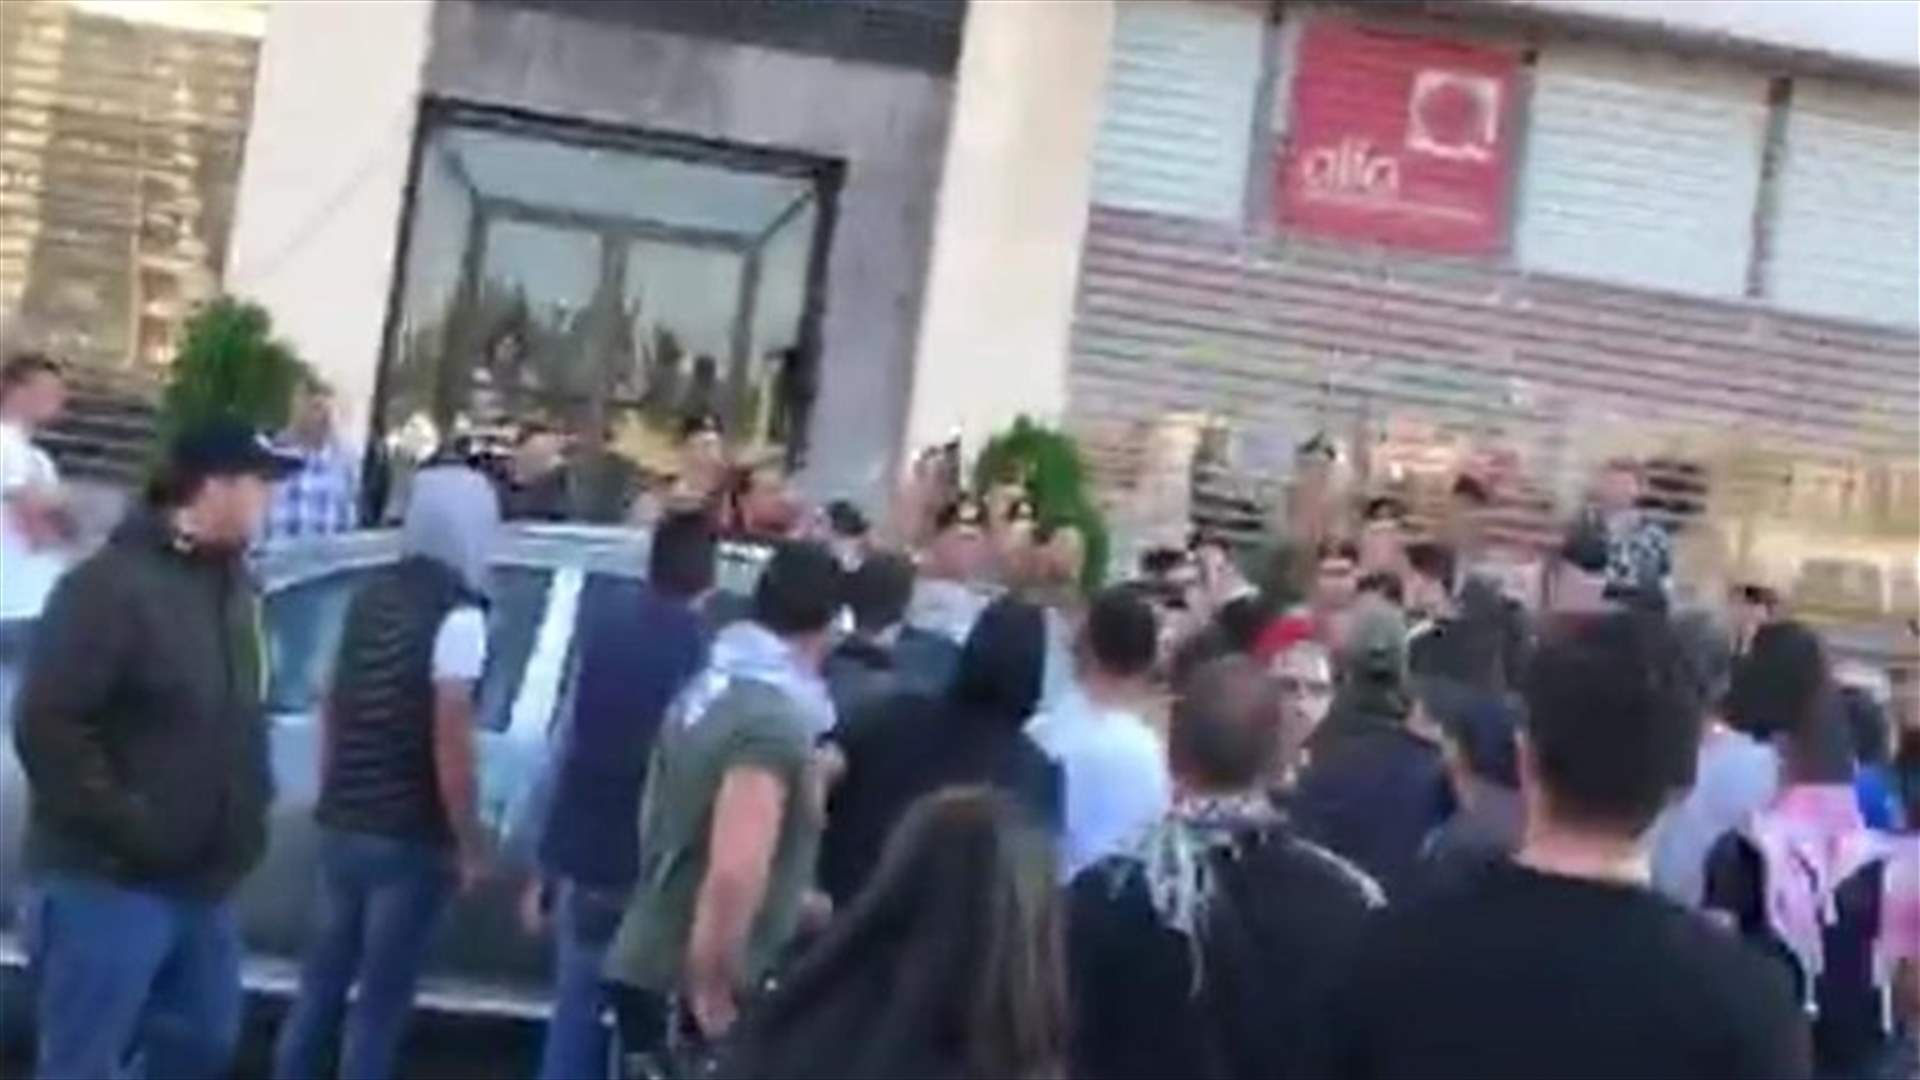 Protesters in Tripoli close offices of Alfa, Middle East Airlines